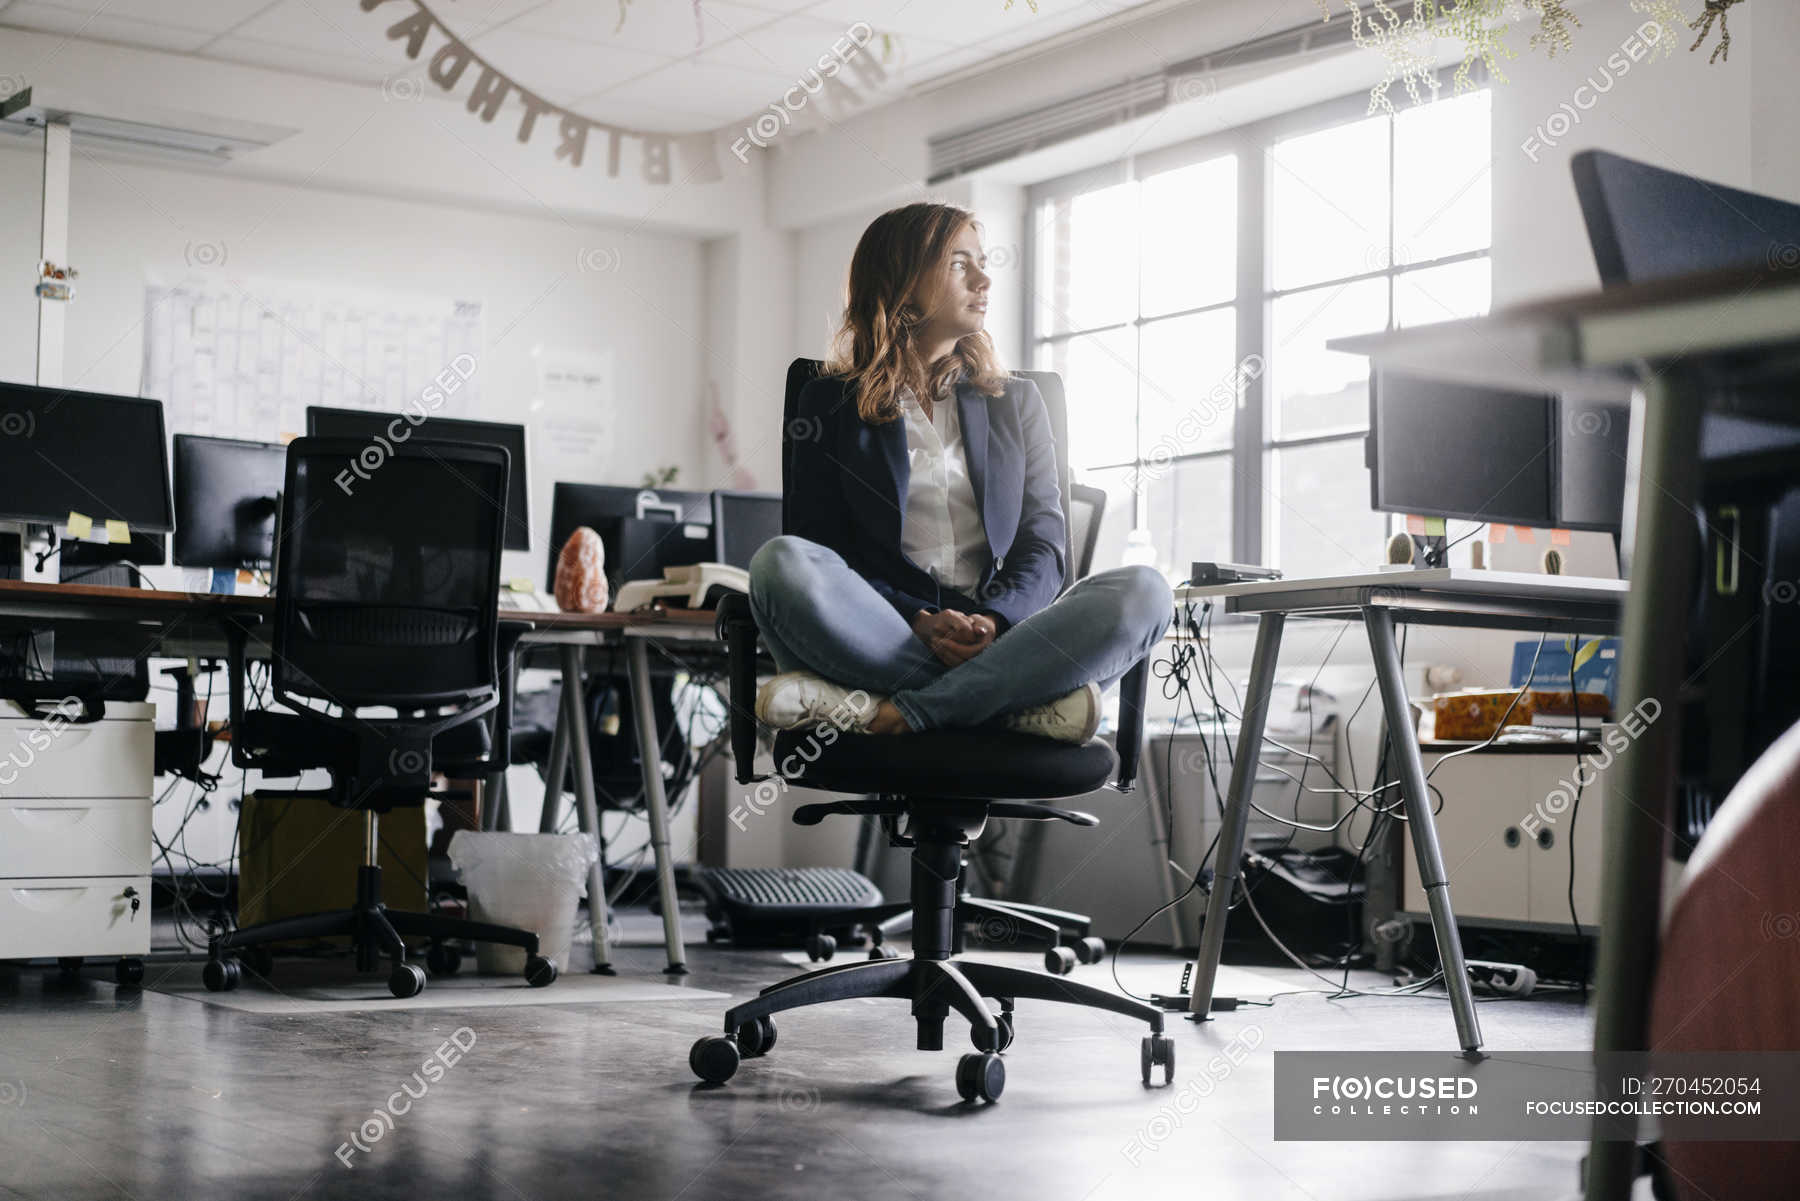 Businesswoman sitting cross-legged on office chair — female, Business  People - Stock Photo | #270452054